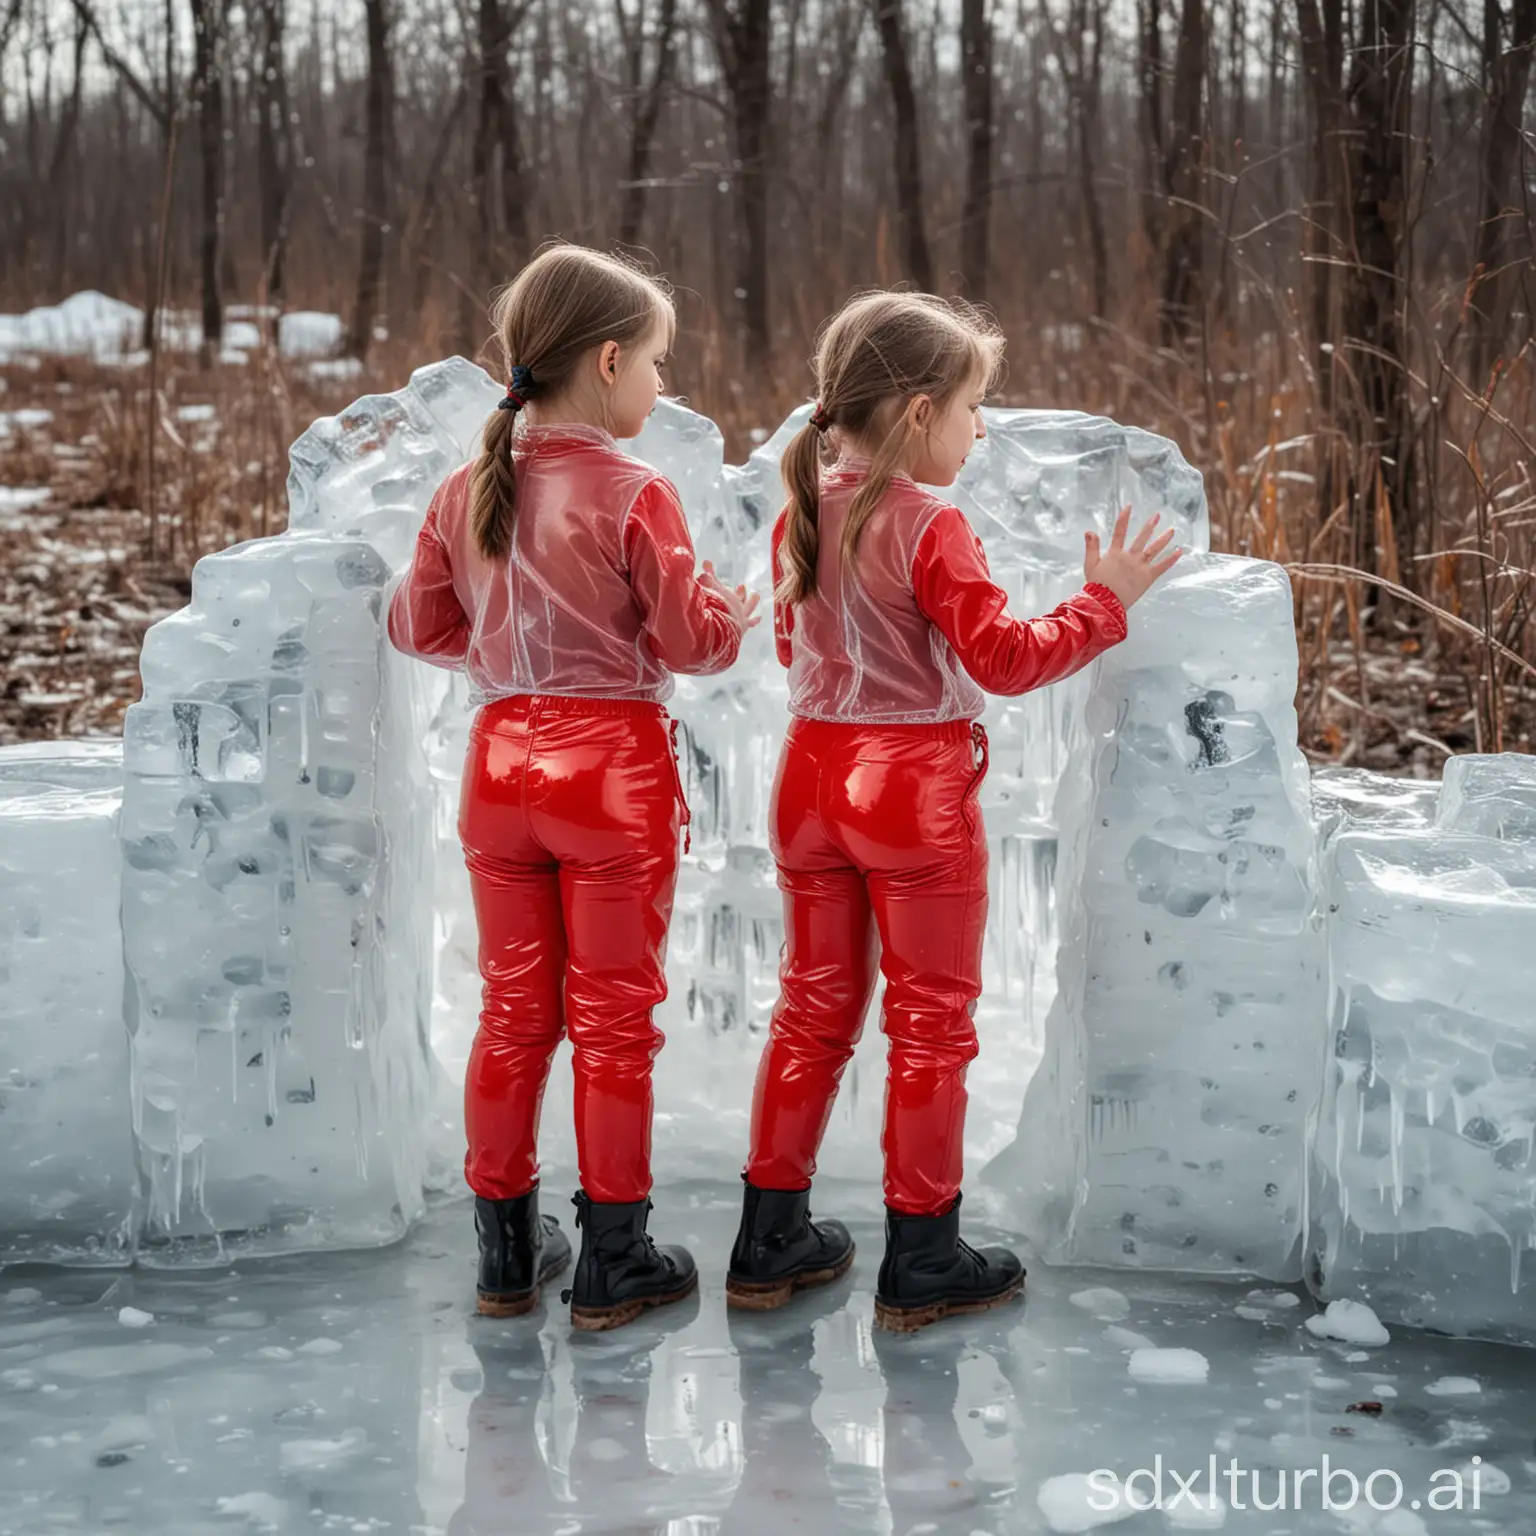 Frozen-Ice-Block-with-Red-Latex-Pants-Clad-Girls